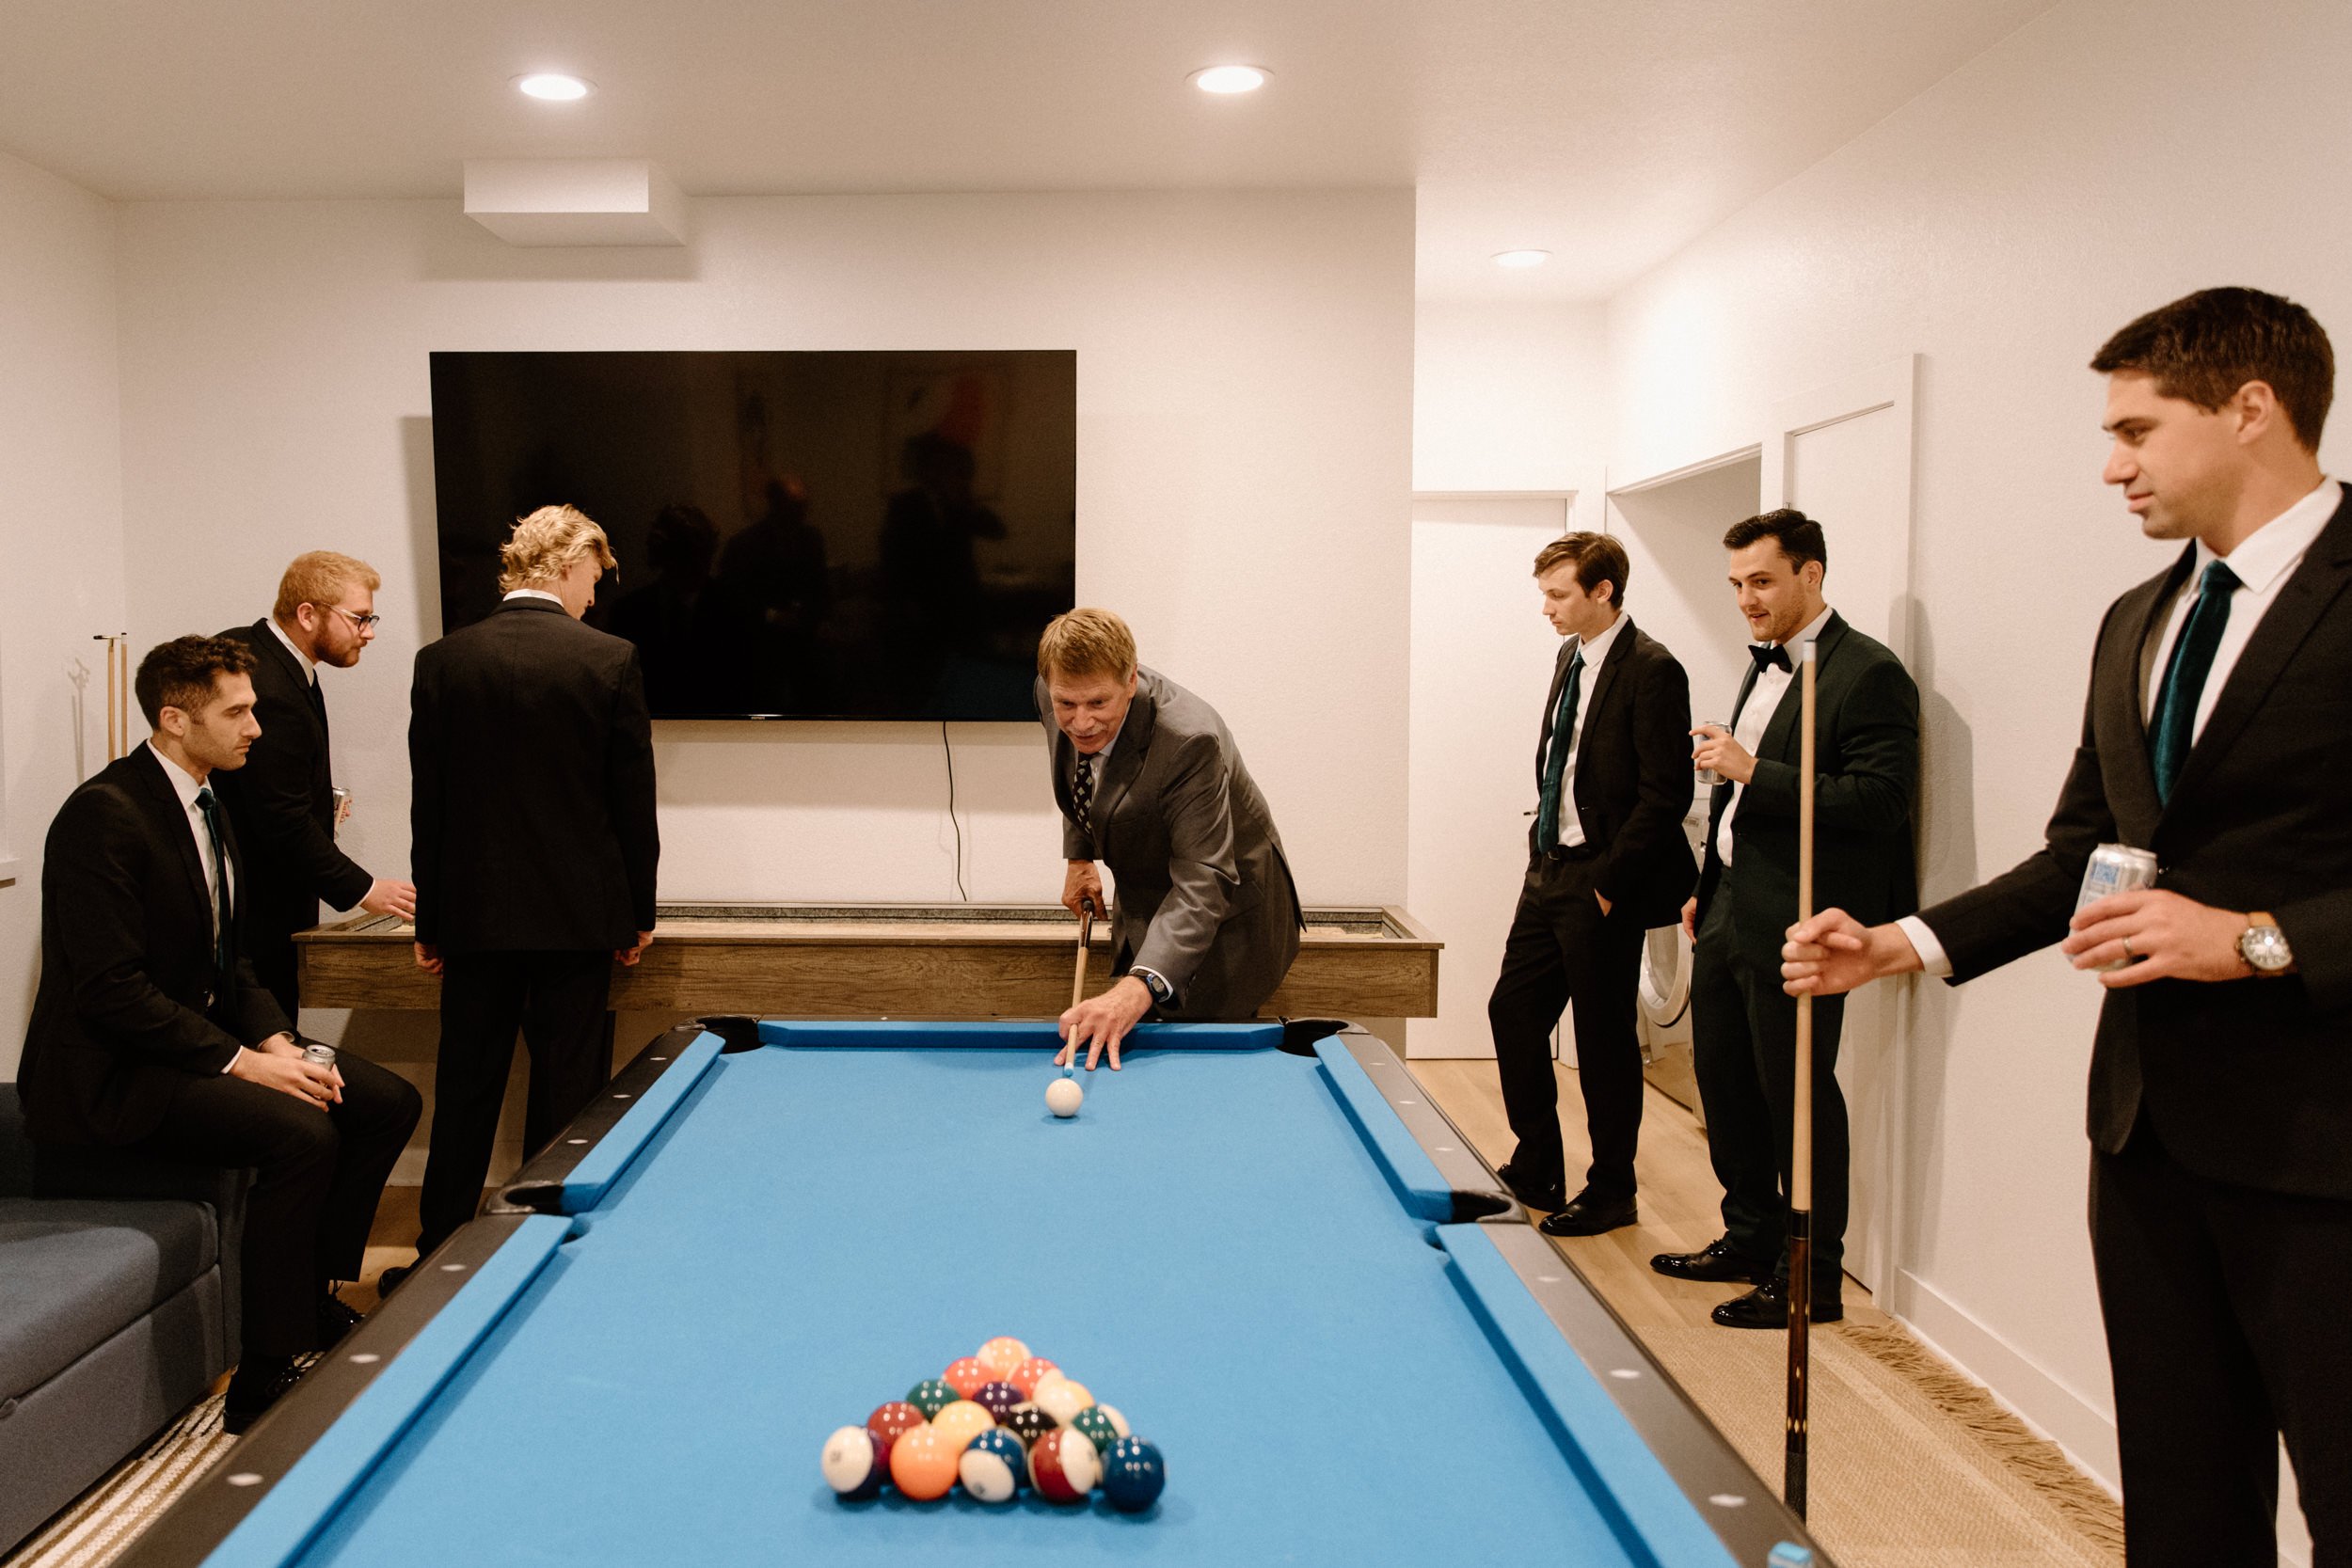 The groomsmen play a game of pool while getting ready